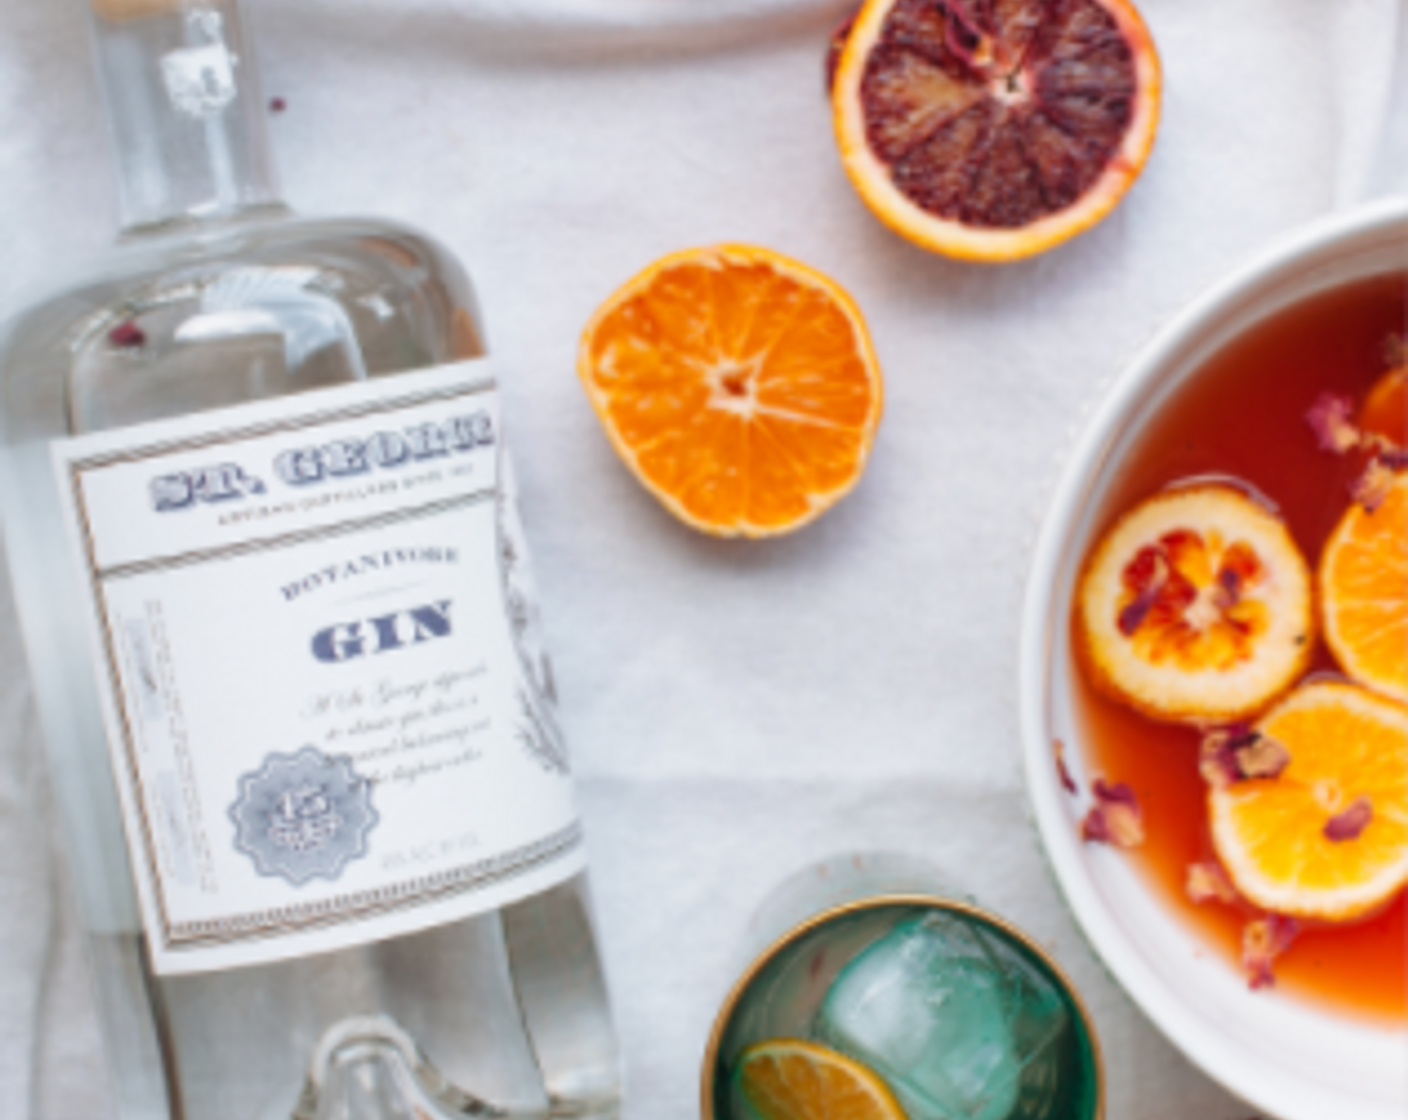 step 3 Combine 1 part Botanical Gin (to taste) and 2 parts shrub in a punch bowl. Top with Oranges (to taste).